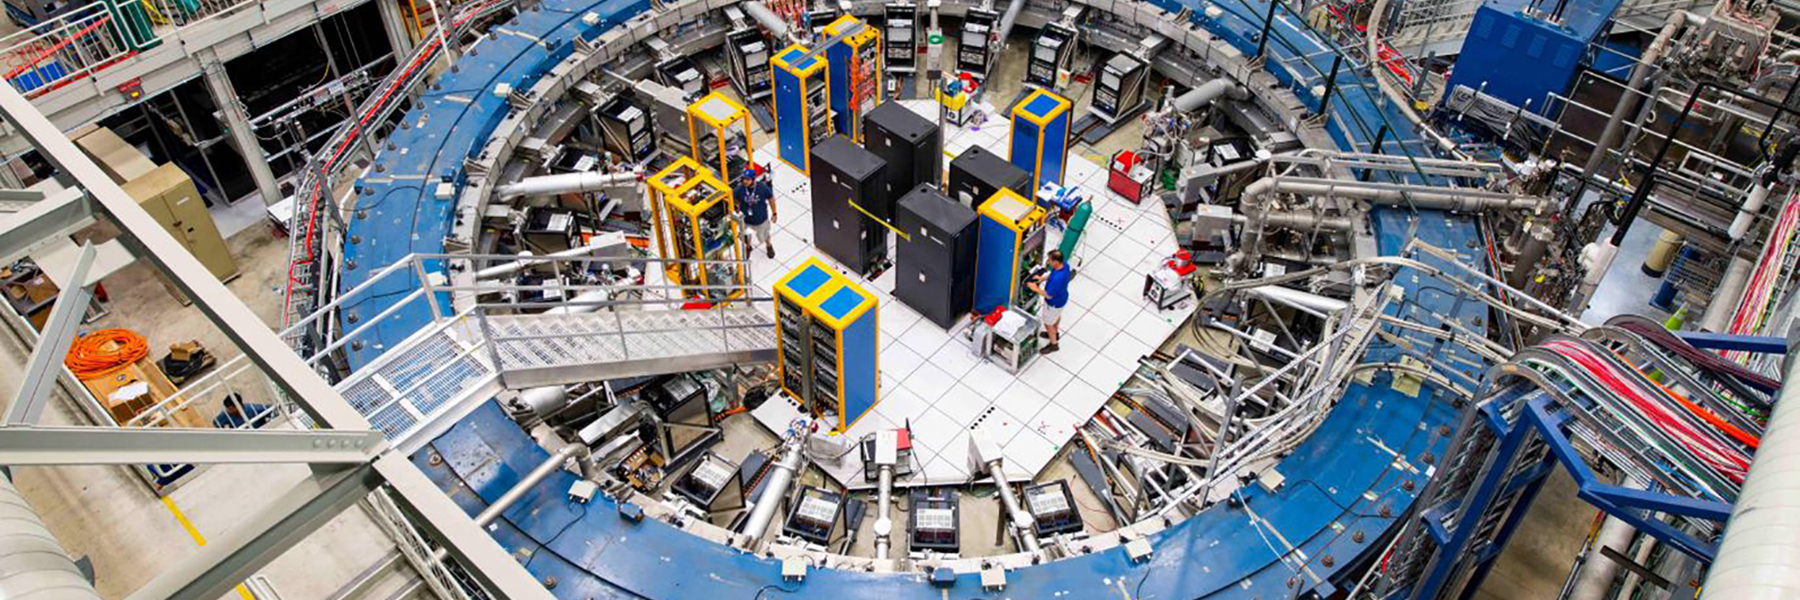 Image of the Muon G2 experiment hall at Fermi National Accelerator Laboratory taken by Reidar Hahn. 
                    The image shows a large technology room from above. Pictured is the muon accelerator, which appears as a huge blue tubular circle. 
                    The muon ring is connected to many computers and different types of equipment that are located in the center of the ring. 
                    There appear to be stairs that go up and over the tube from one side to the other for access for the scientists. (photo by Reidar Hahn Fermilab)